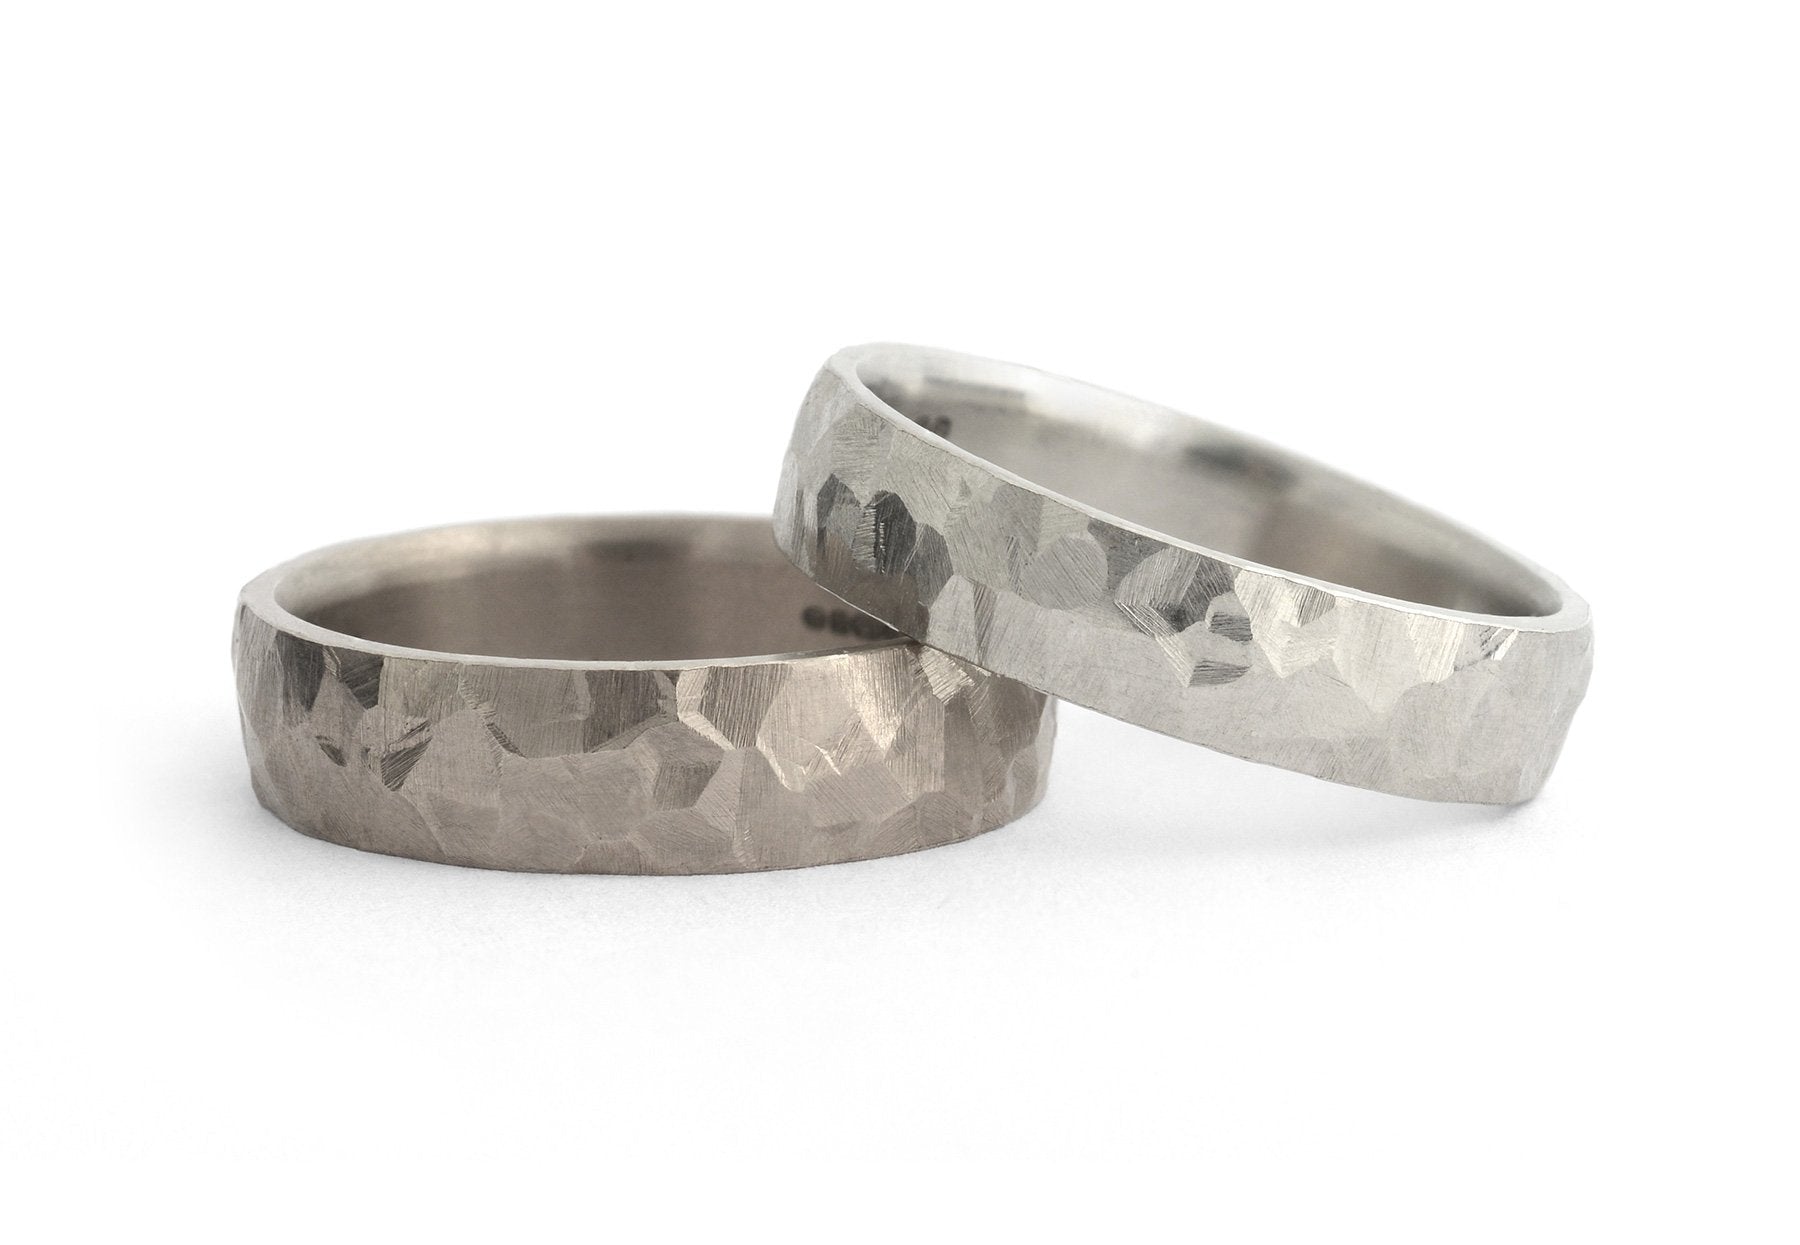 Hammered men's wedding bands in 18 carat white gold and platinum